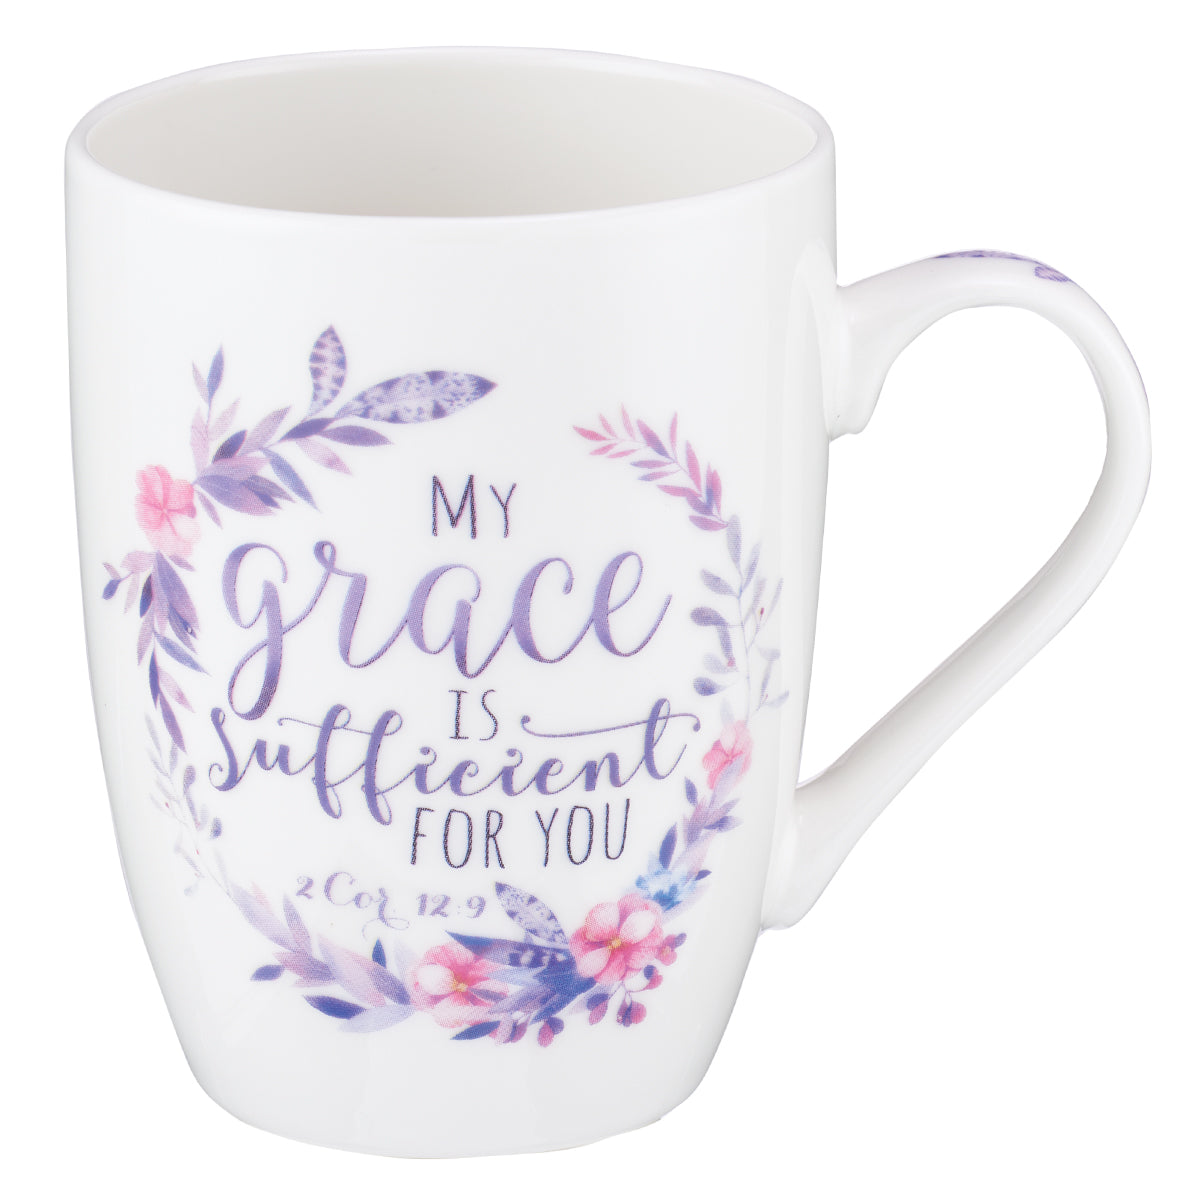 Image of My Grace is Sufficient Coffee Mug - 2 Corinthians 12:9 other